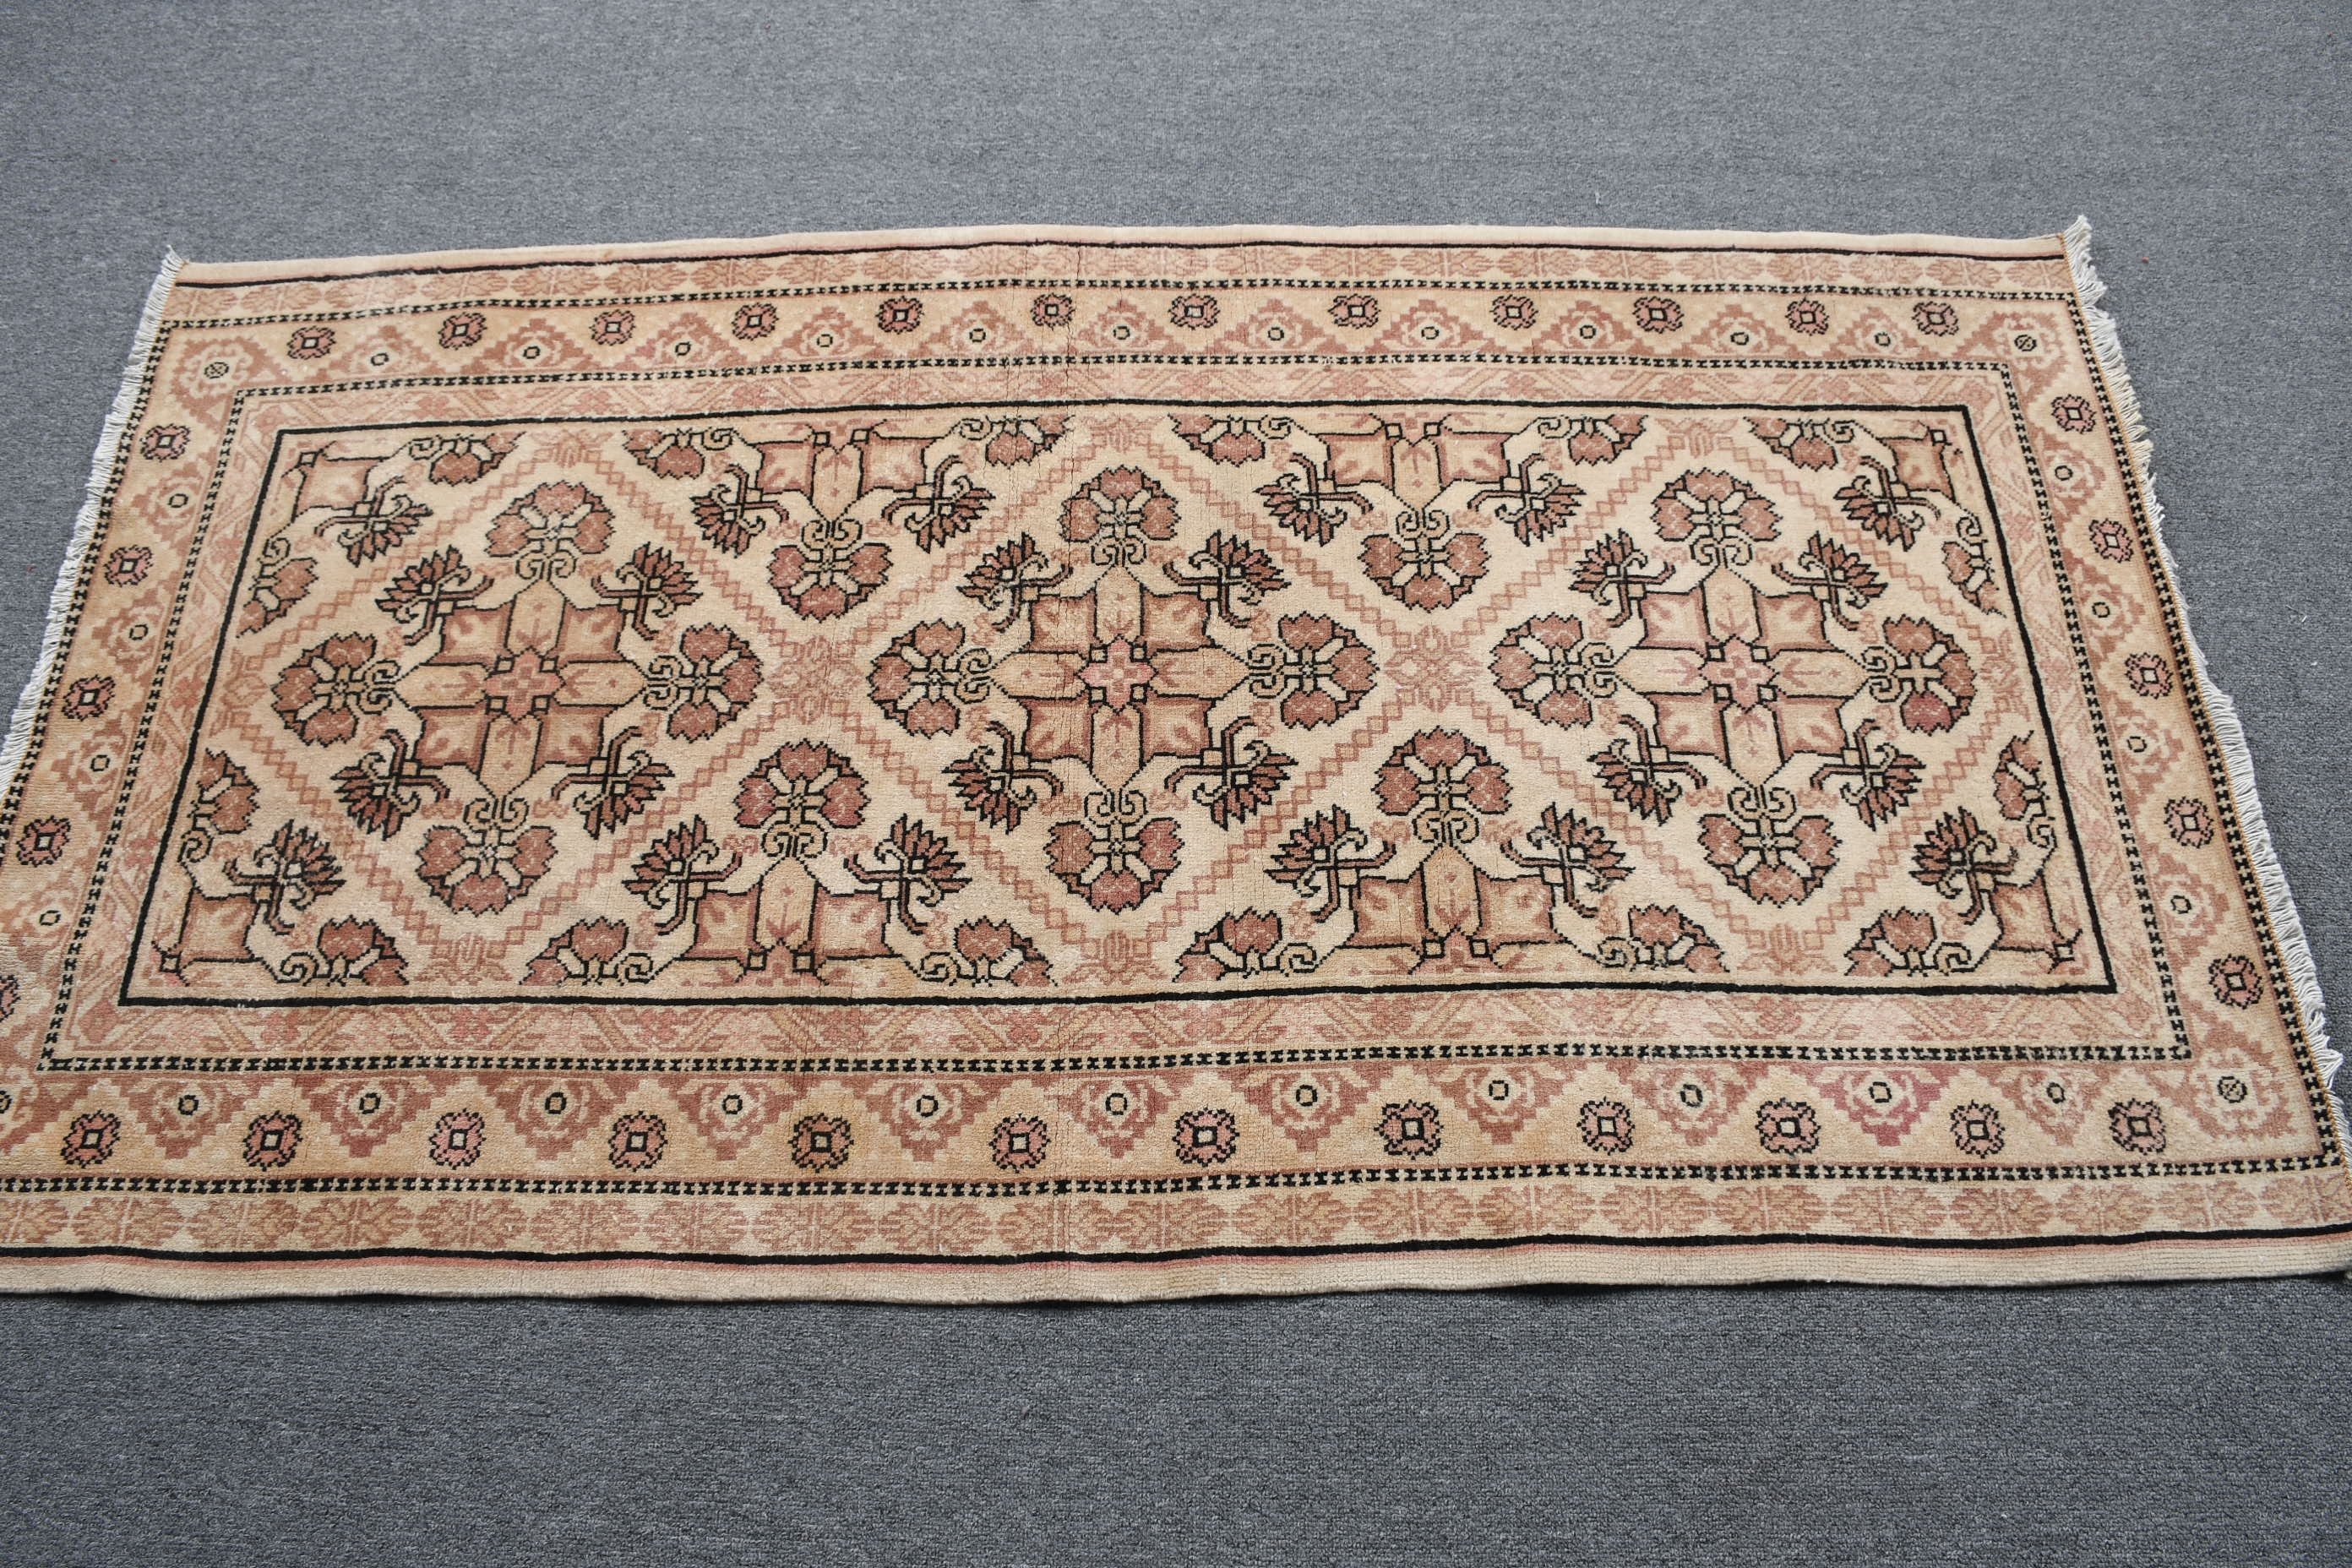 Kitchen Rugs, Rugs for Entry, Vintage Rug, Retro Rugs, Anatolian Rug, Brown  2.9x5.3 ft Accent Rug, Turkish Rugs, Bedroom Rug